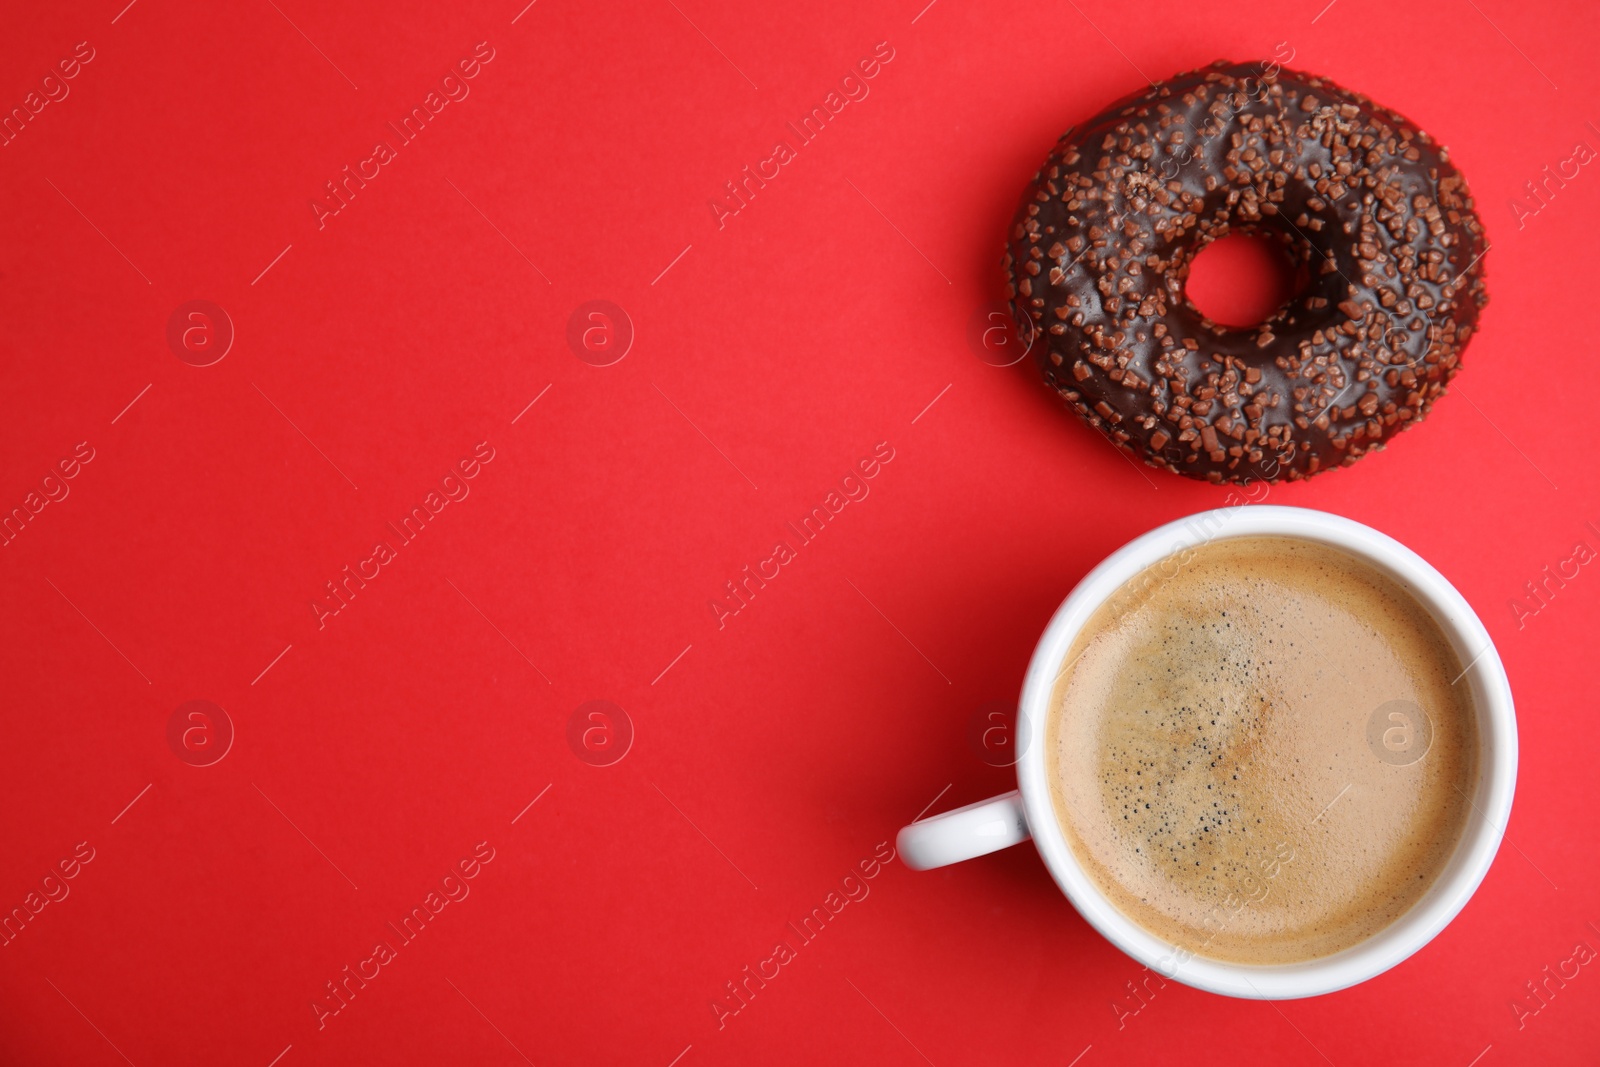 Photo of Delicious coffee and donut on red background, top view with space for text. Sweet pastries